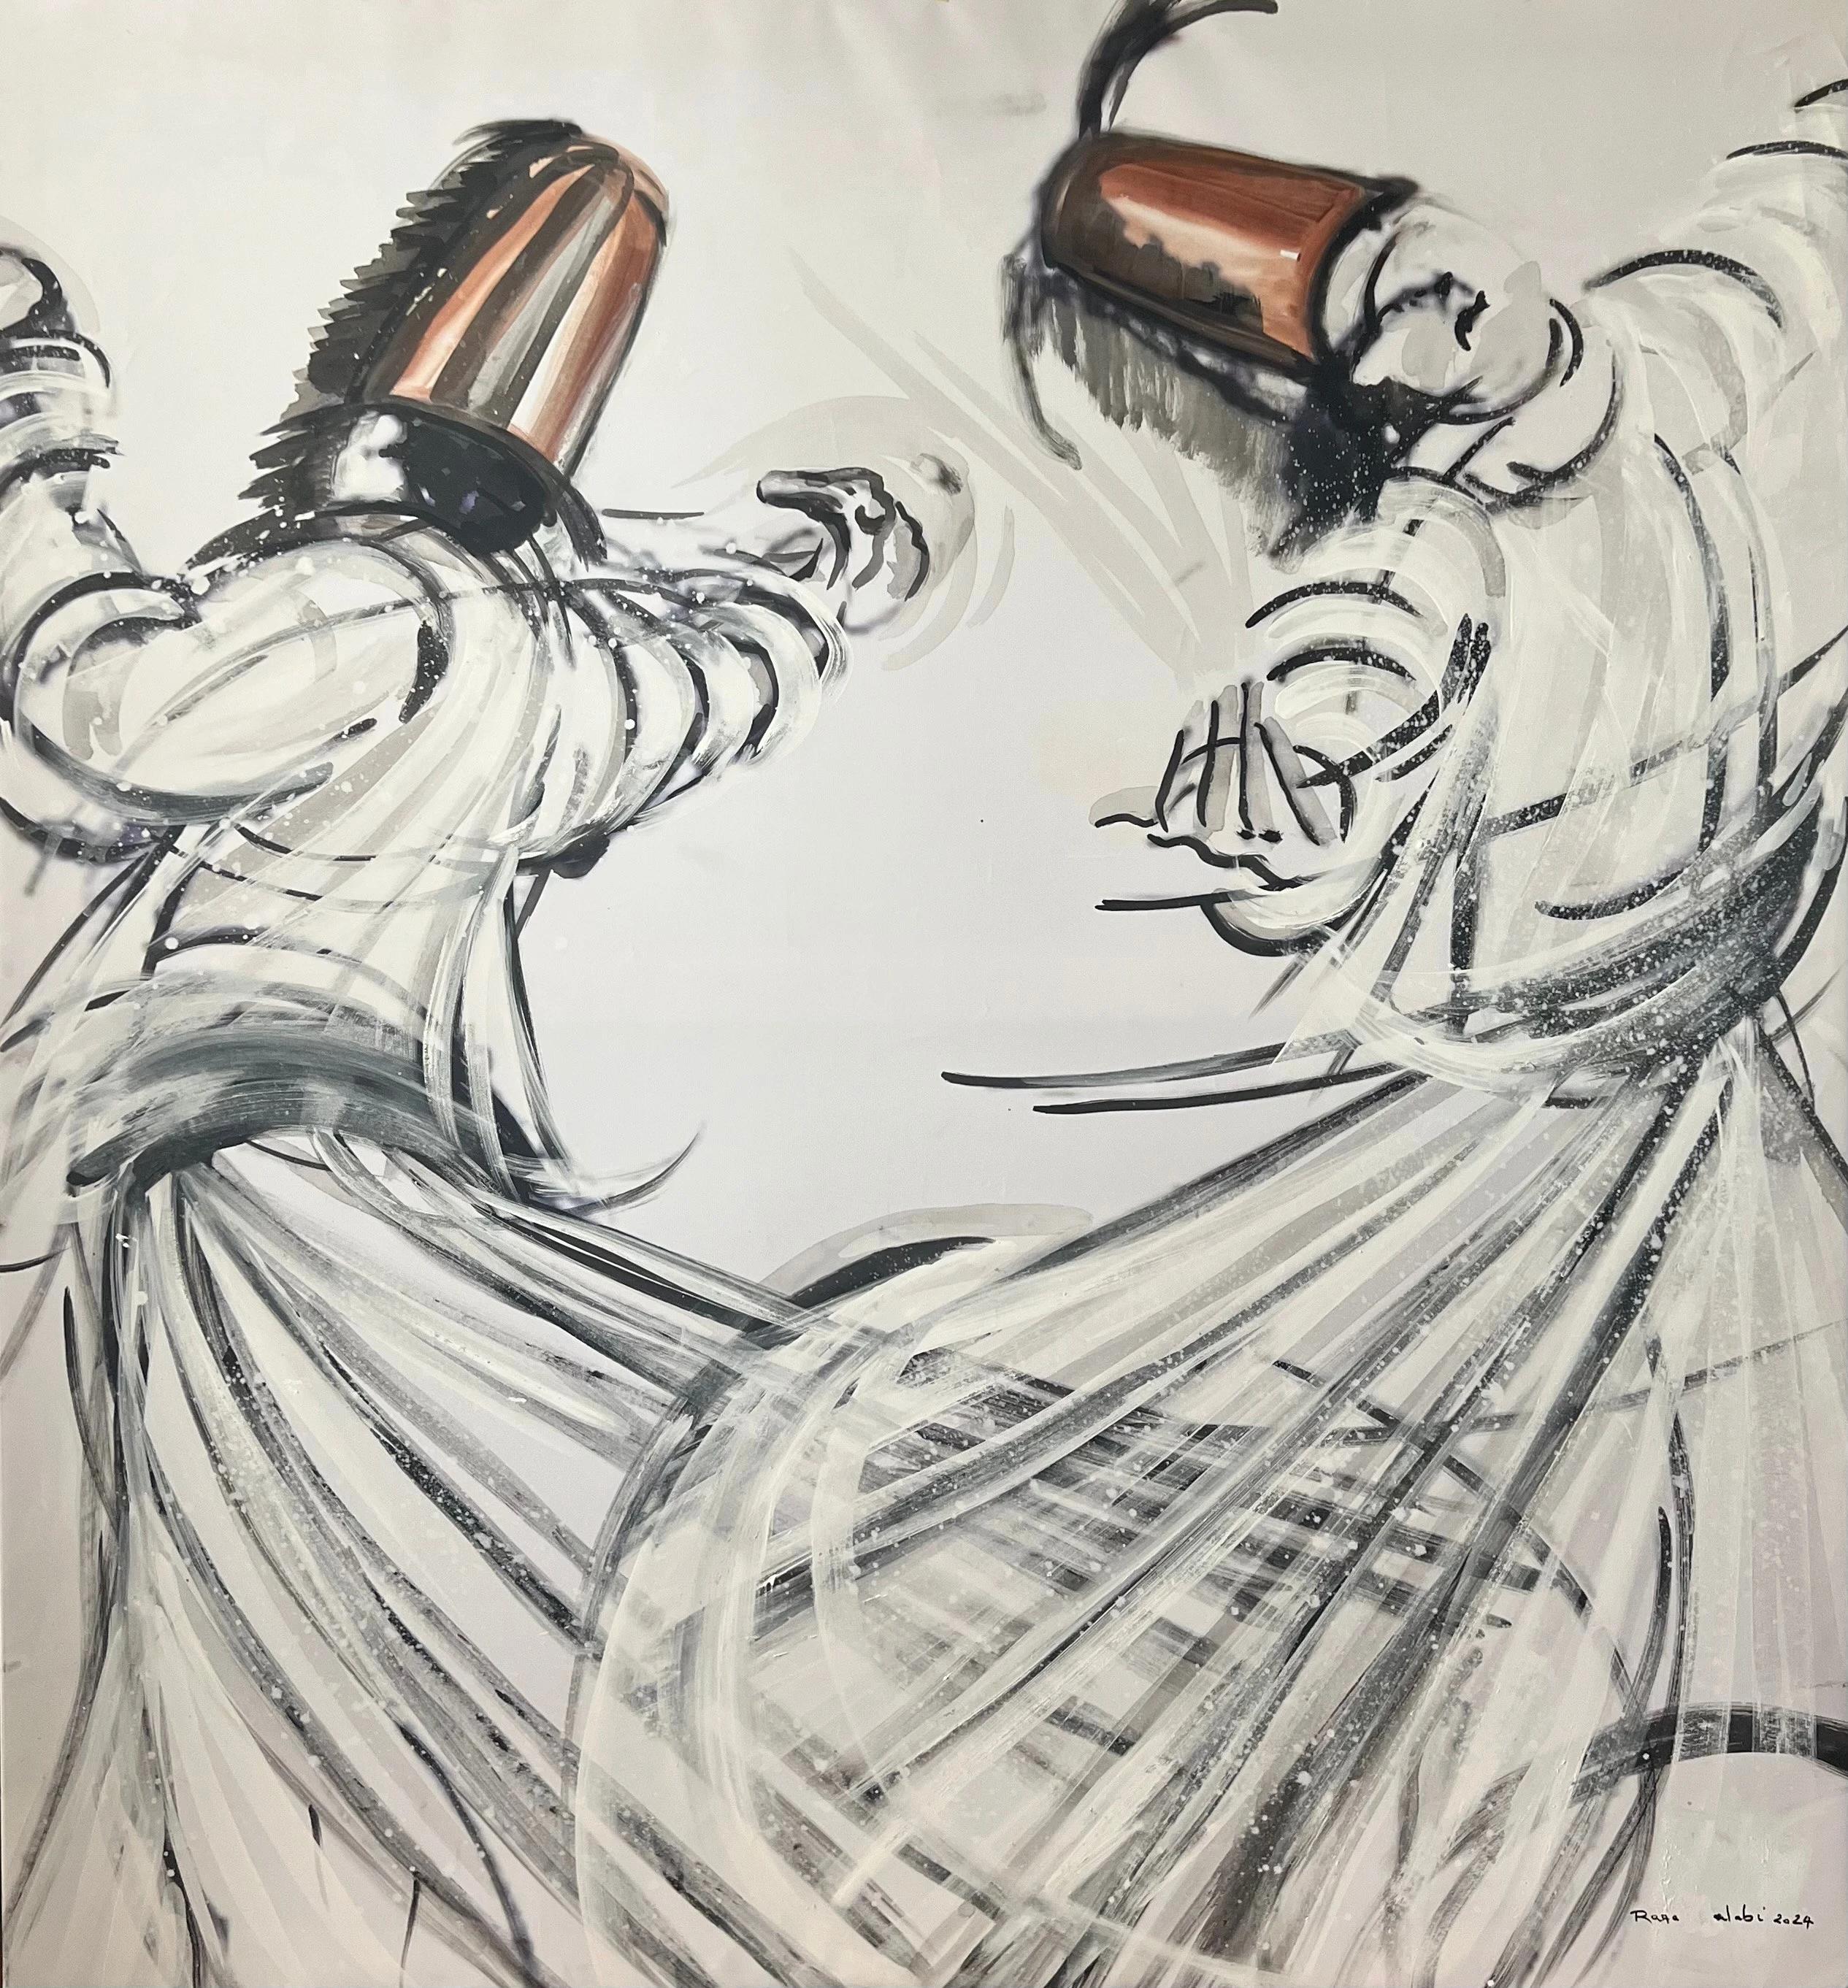 "Dervish Pair" Painting 55" x 51" inch by Rana Chalabi

Rana Chalabi is an established Syrian/Lebanese artist who lived in Cairo for over 35 years and now lives between Beirut, Cairo and Amsterdam.  

She is a visionary artist whose work spans a